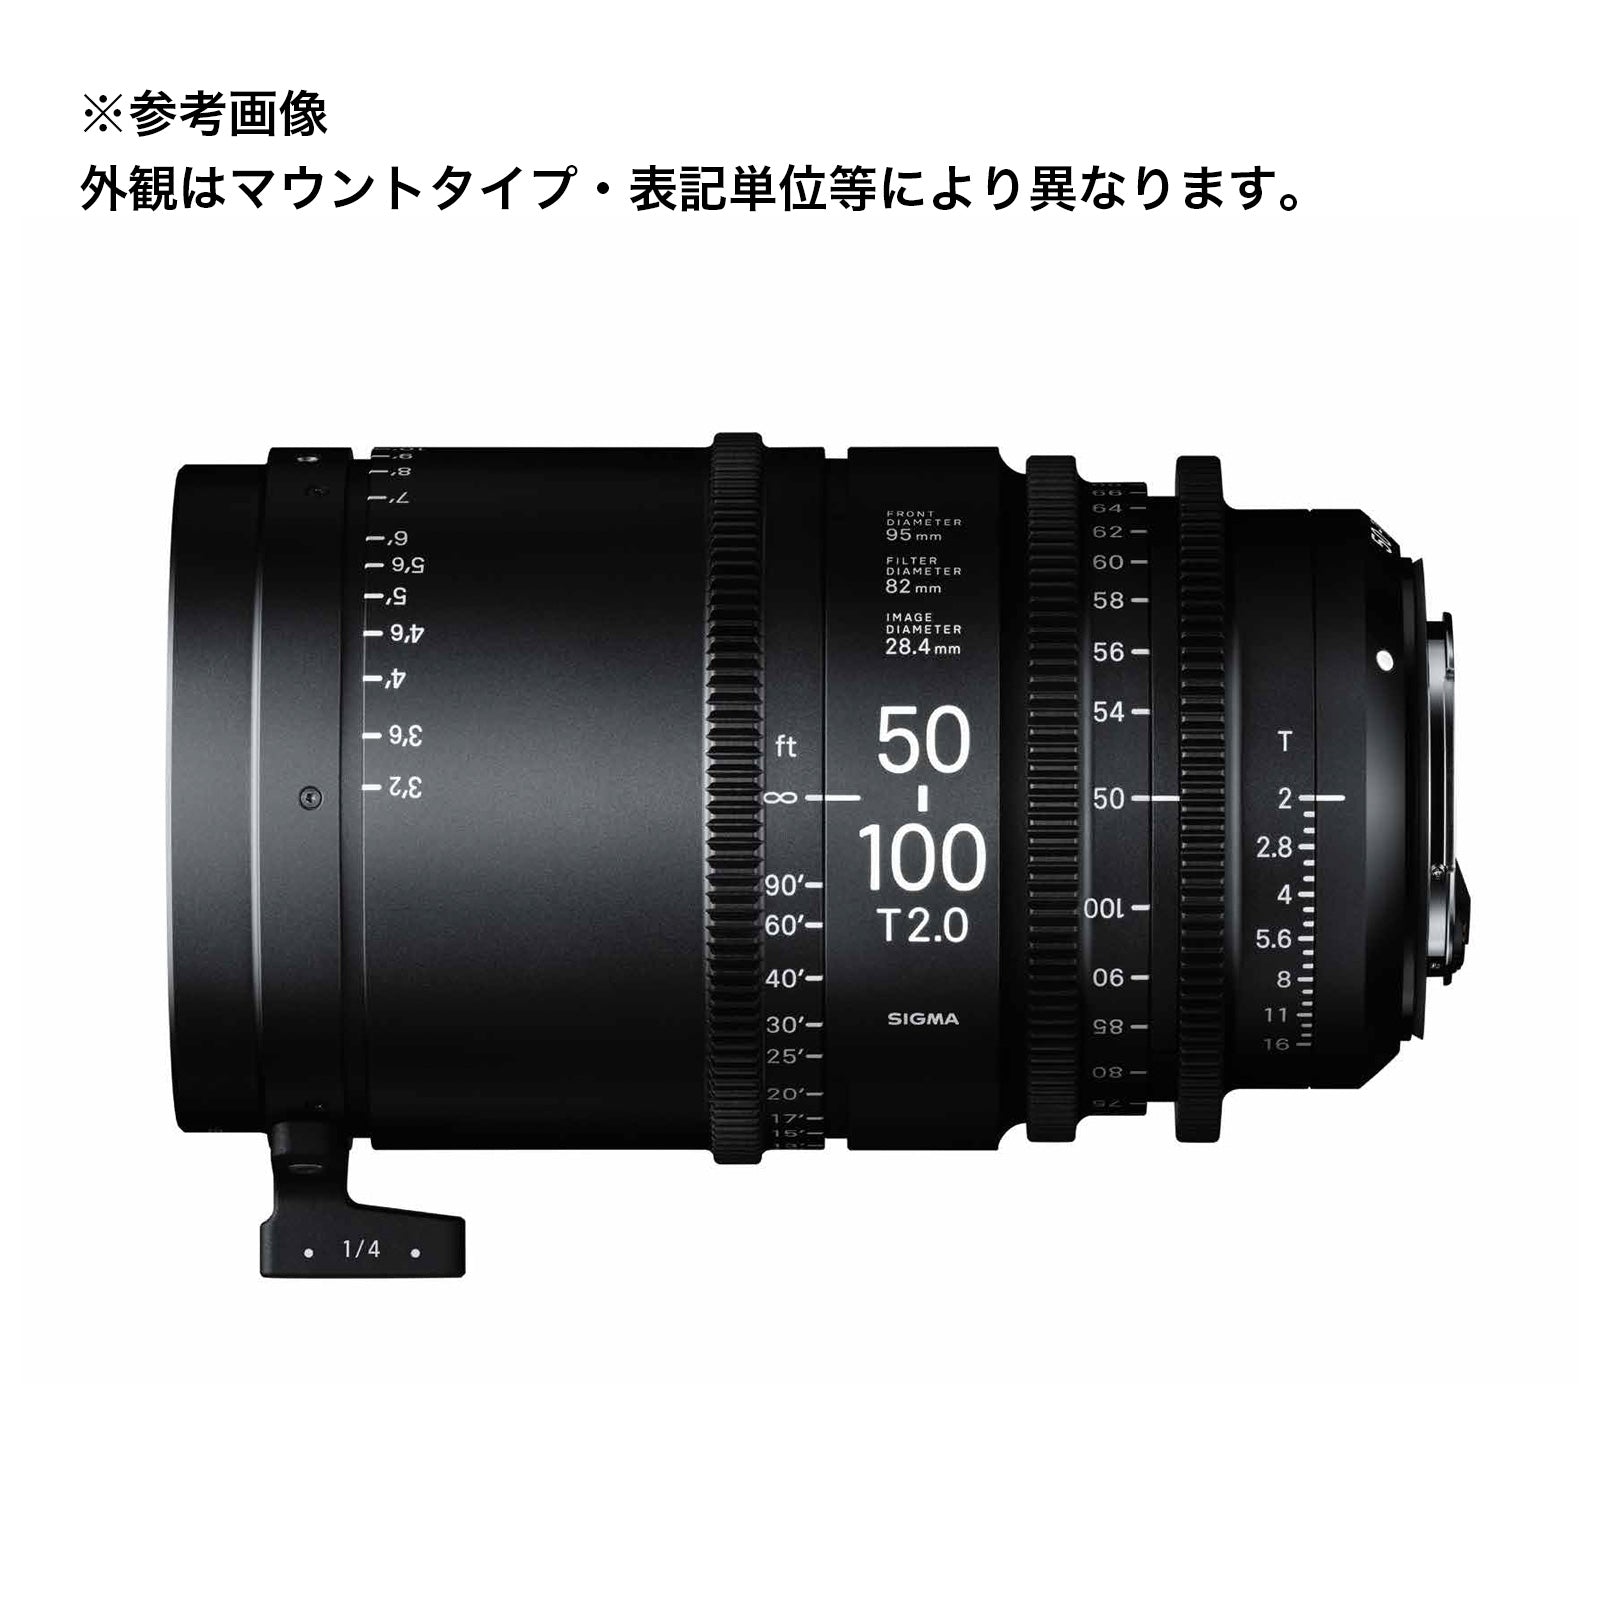 SIGMA(シグマ) CINE LENS High Speed Zoom Line 50-100mm T2 / Eマウント フィート表記